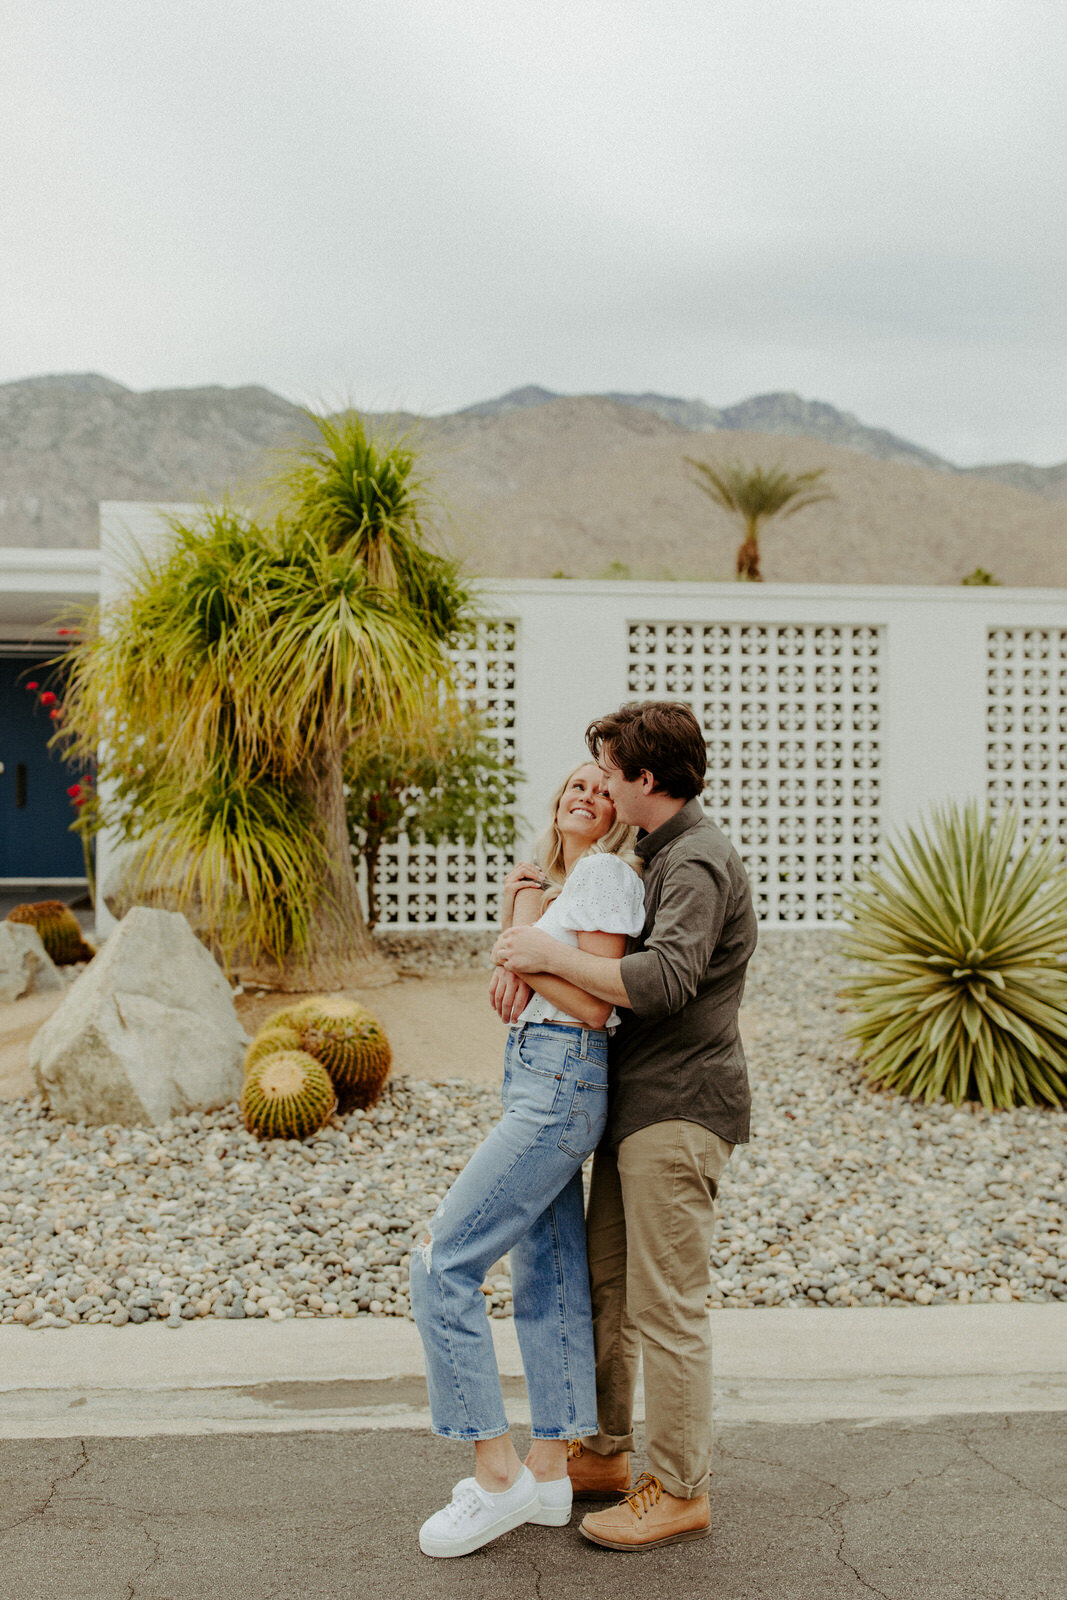 Brianna-Broyles-Photography-Pink-Palm-Springs-Engagement-Session-25.jpg